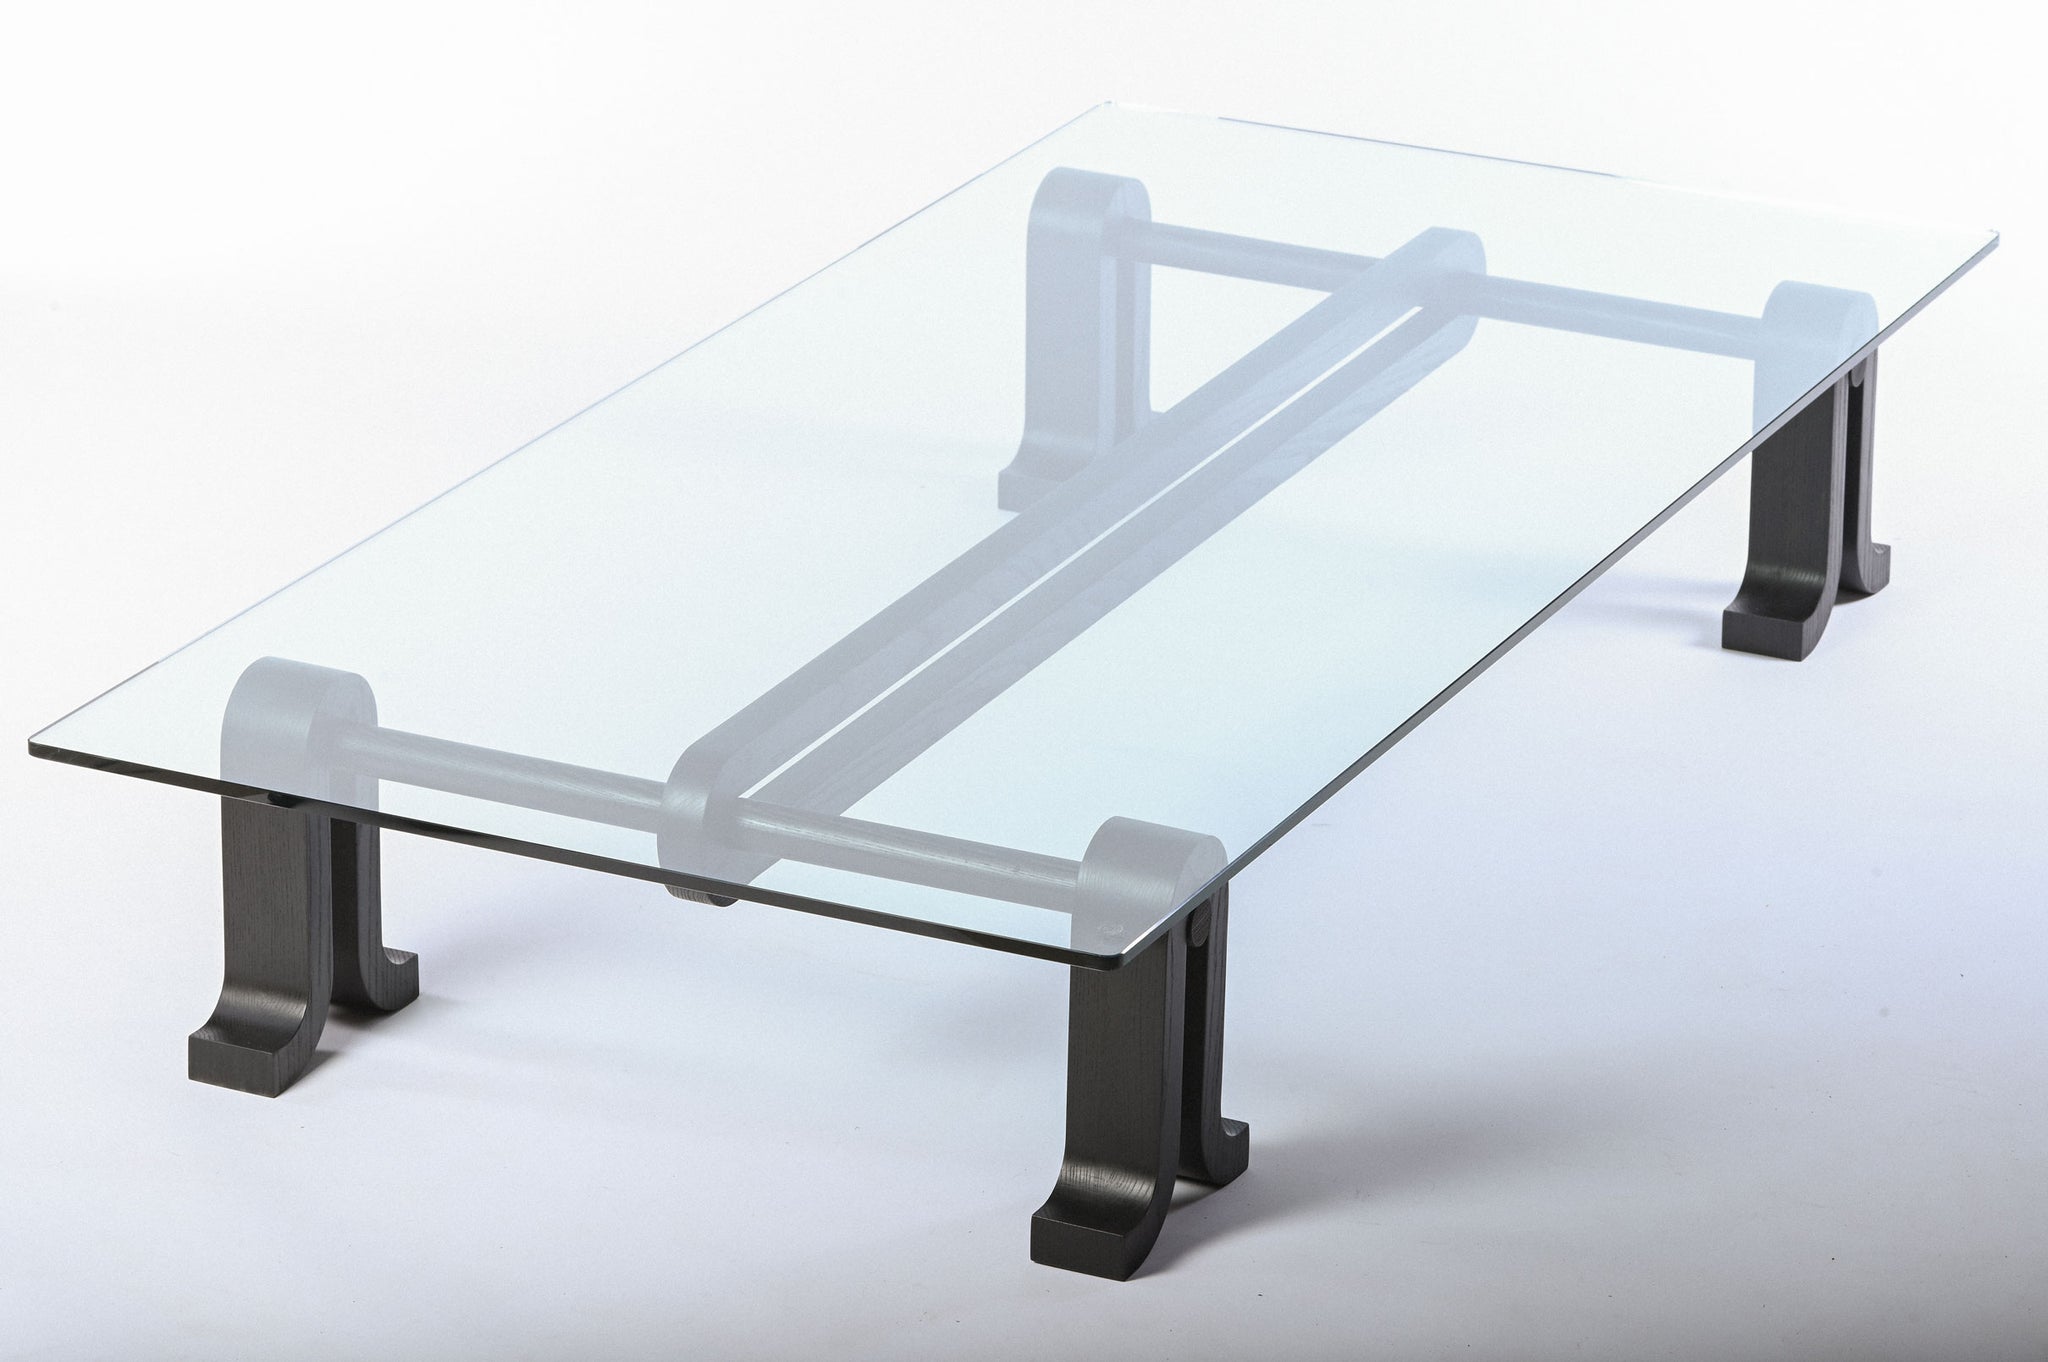 Loop Table in black lit on a white backdrop